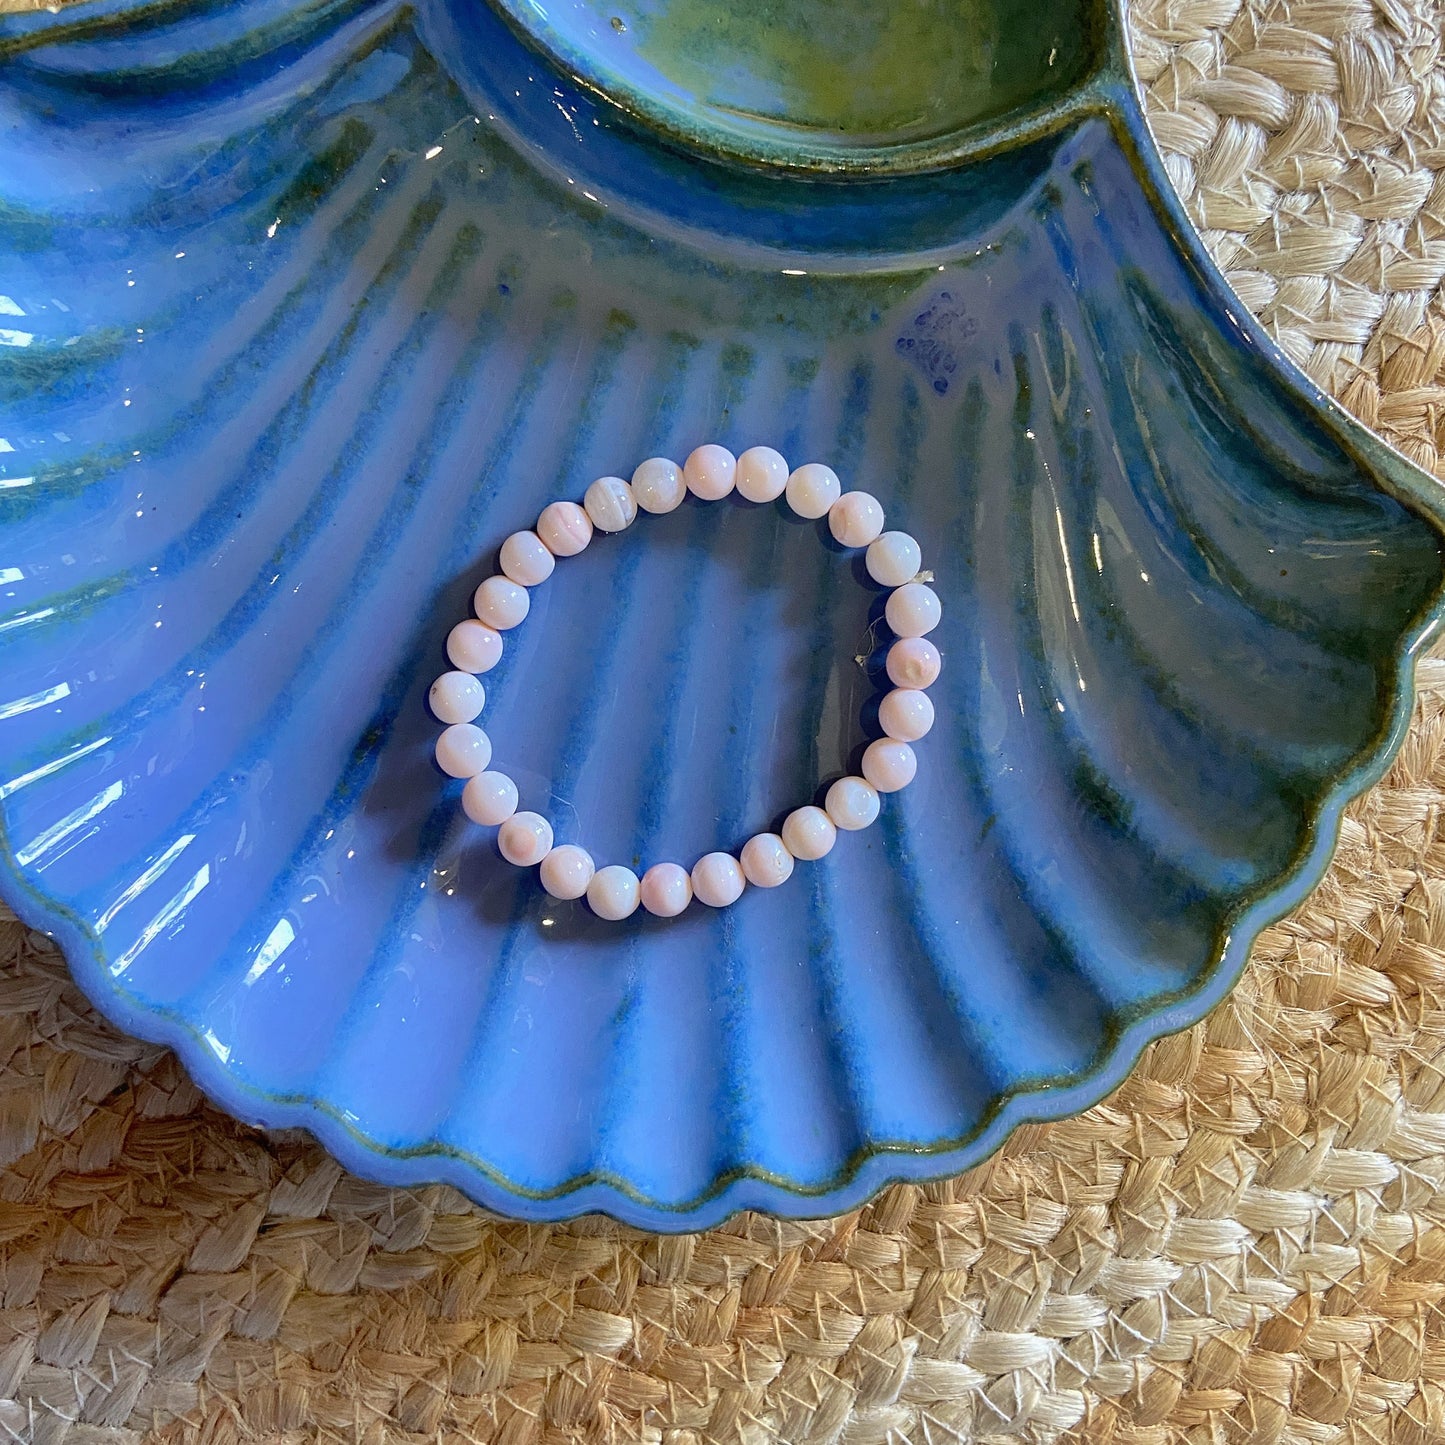 Pink Opal Bead Bracelet | Sooth Anxiety Crystal & Stones